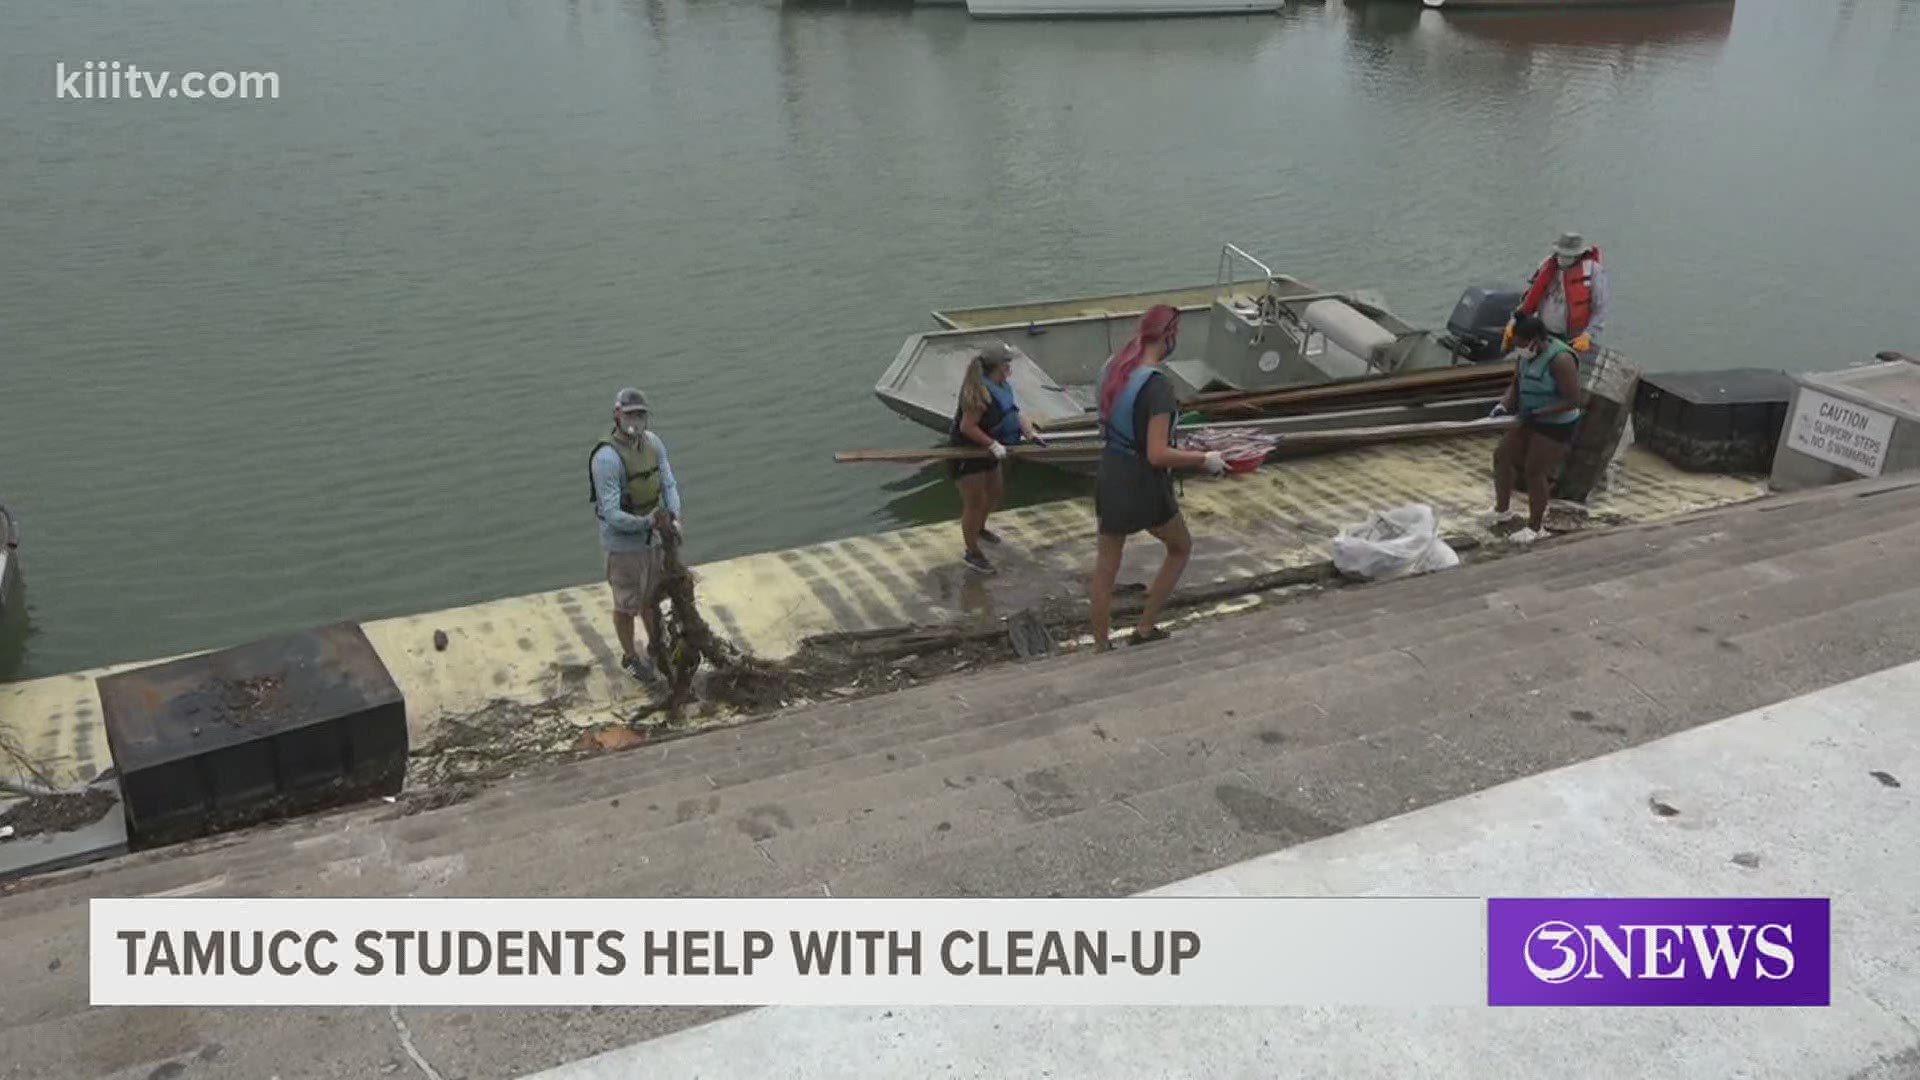 The team of students plan to continue cleaning up the debris throughout the week.